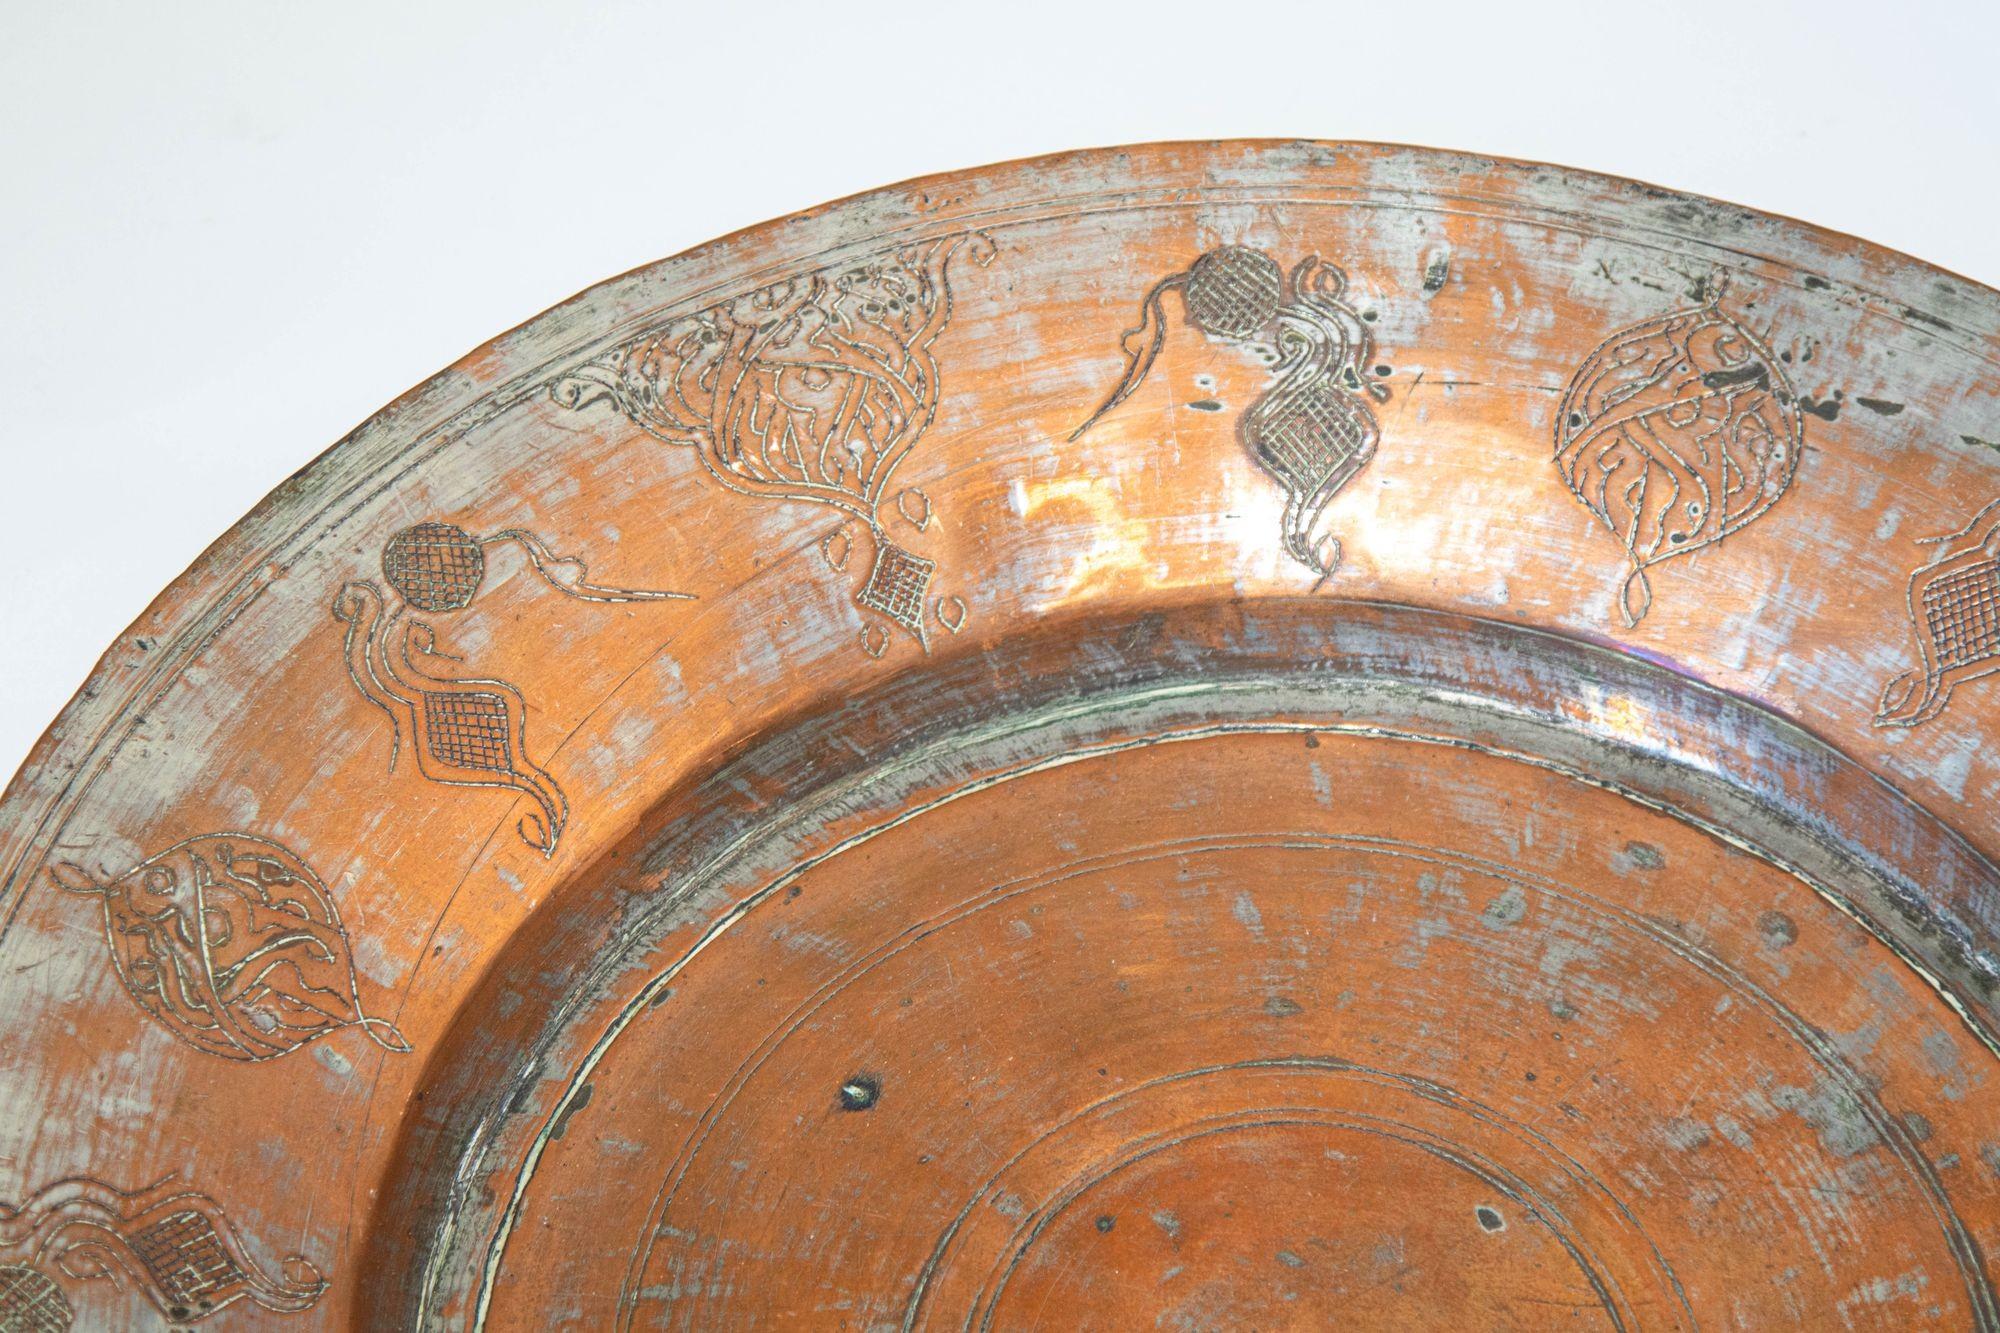 Large tinned copper Rajasthani Asian Metal bowl.
Handcrafted Asian tinned copper metal round vessel bowl.
Beautiful antique Moorish Middle Eastern copper tinned large plate dish bowl with engraved design.
Beautifully aged old copper with a nice